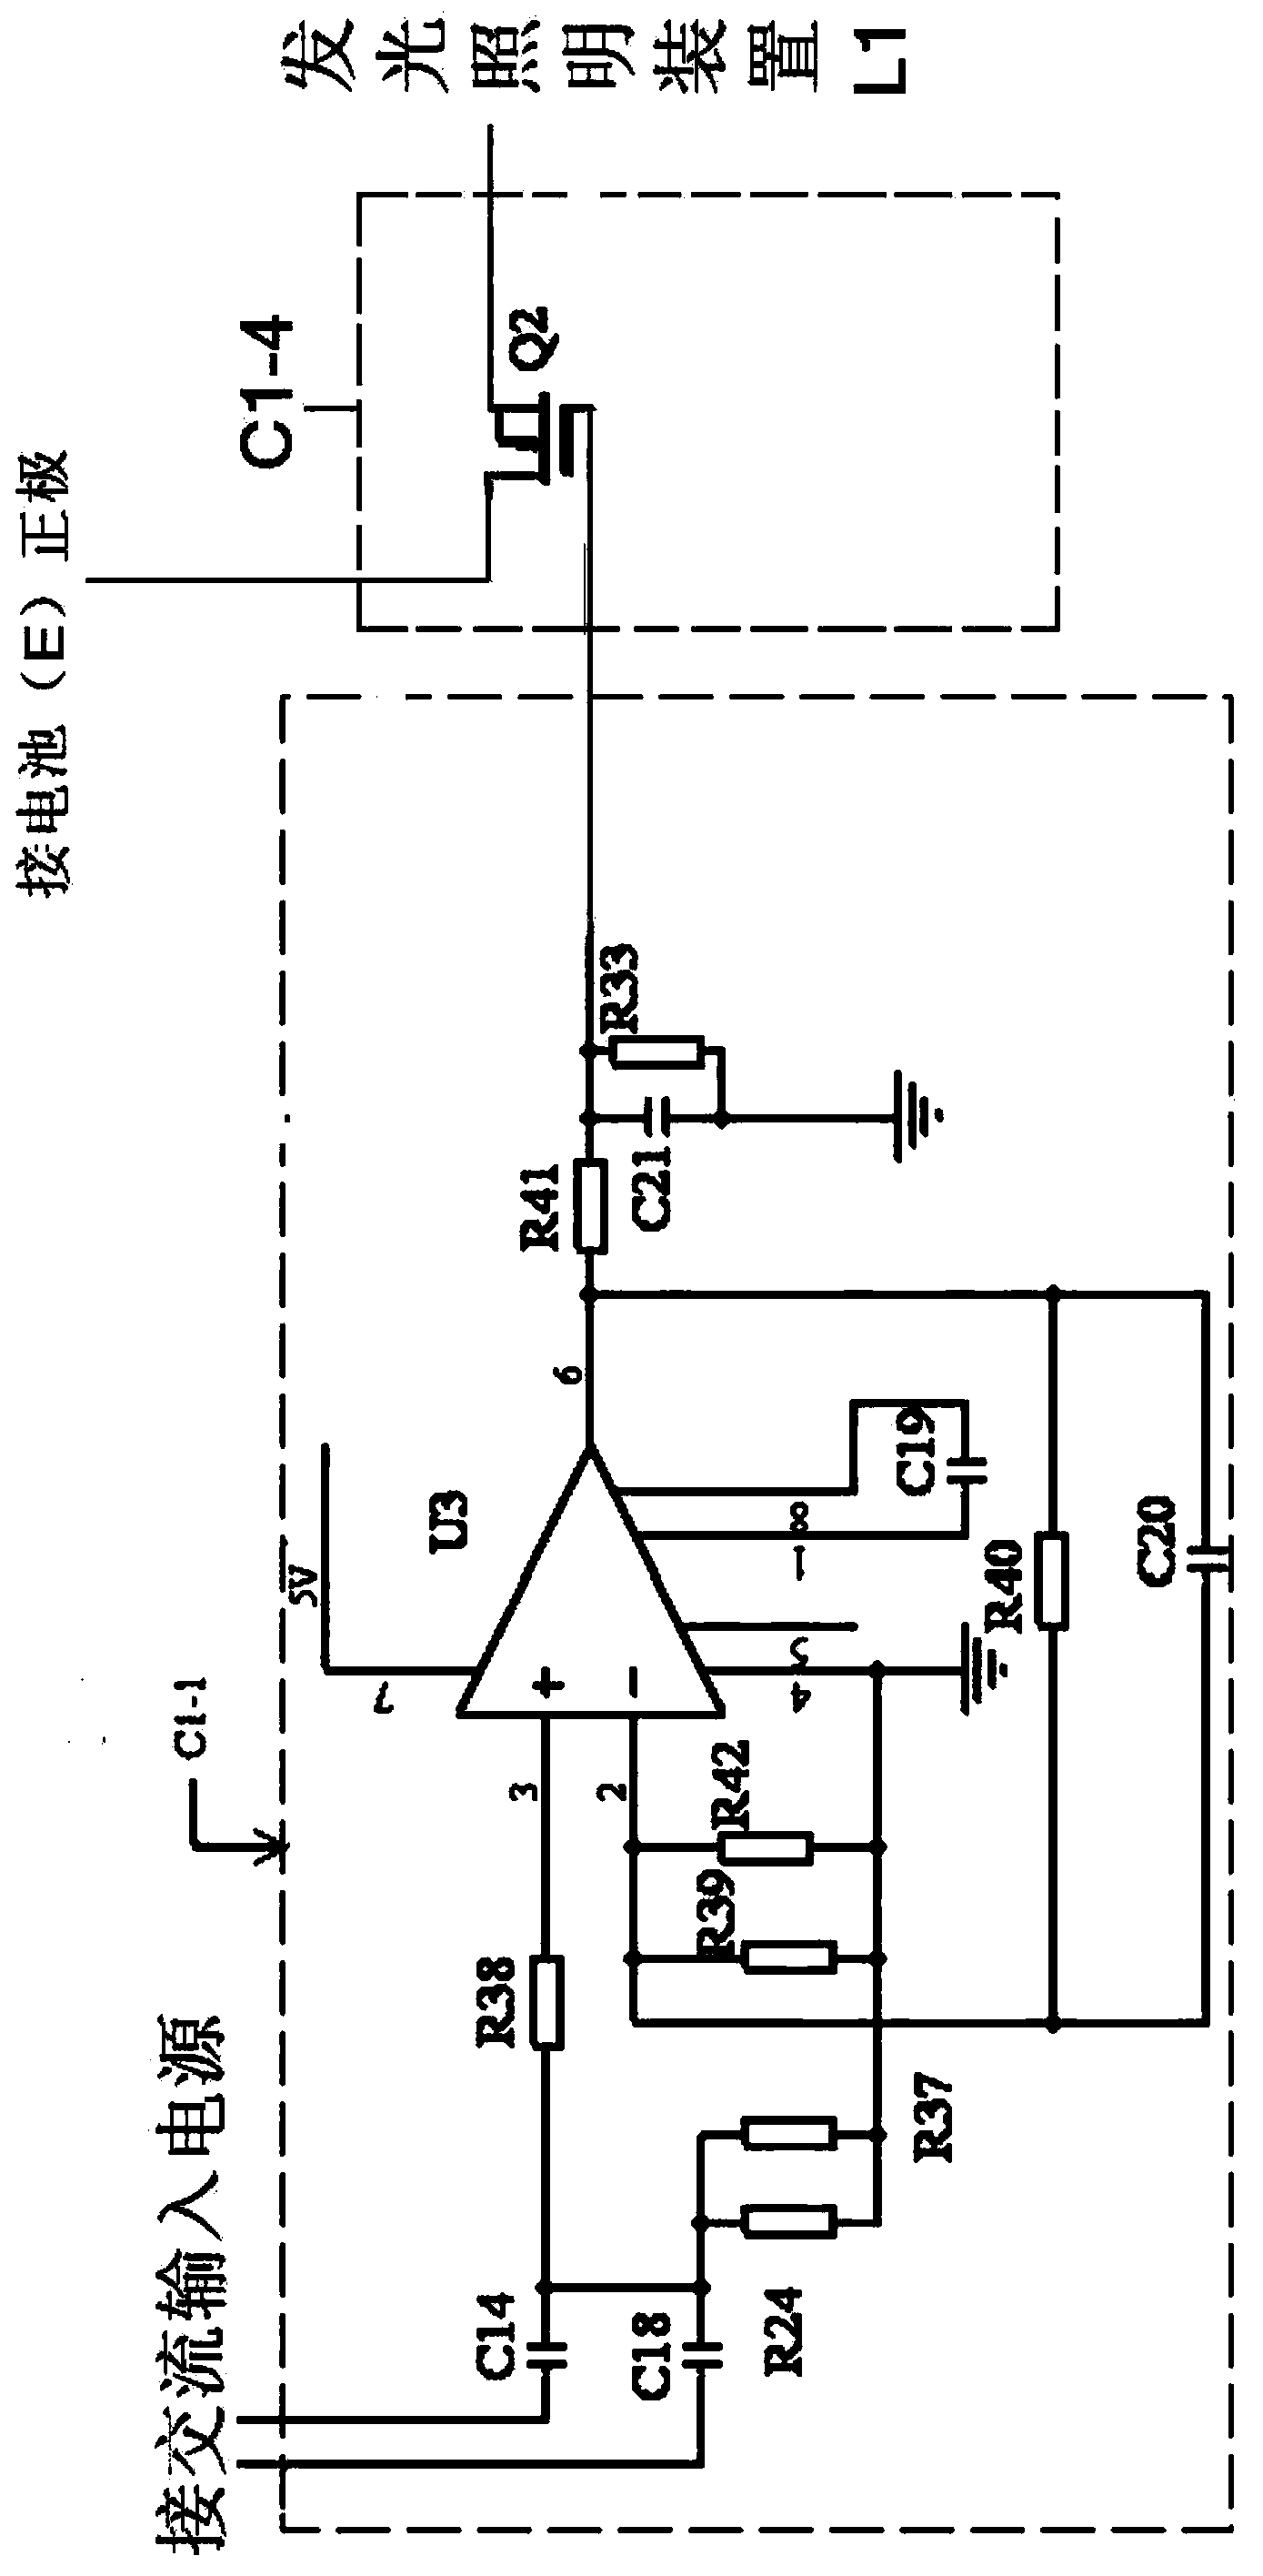 Emergency lighting device based on small electric signals in detection circuit